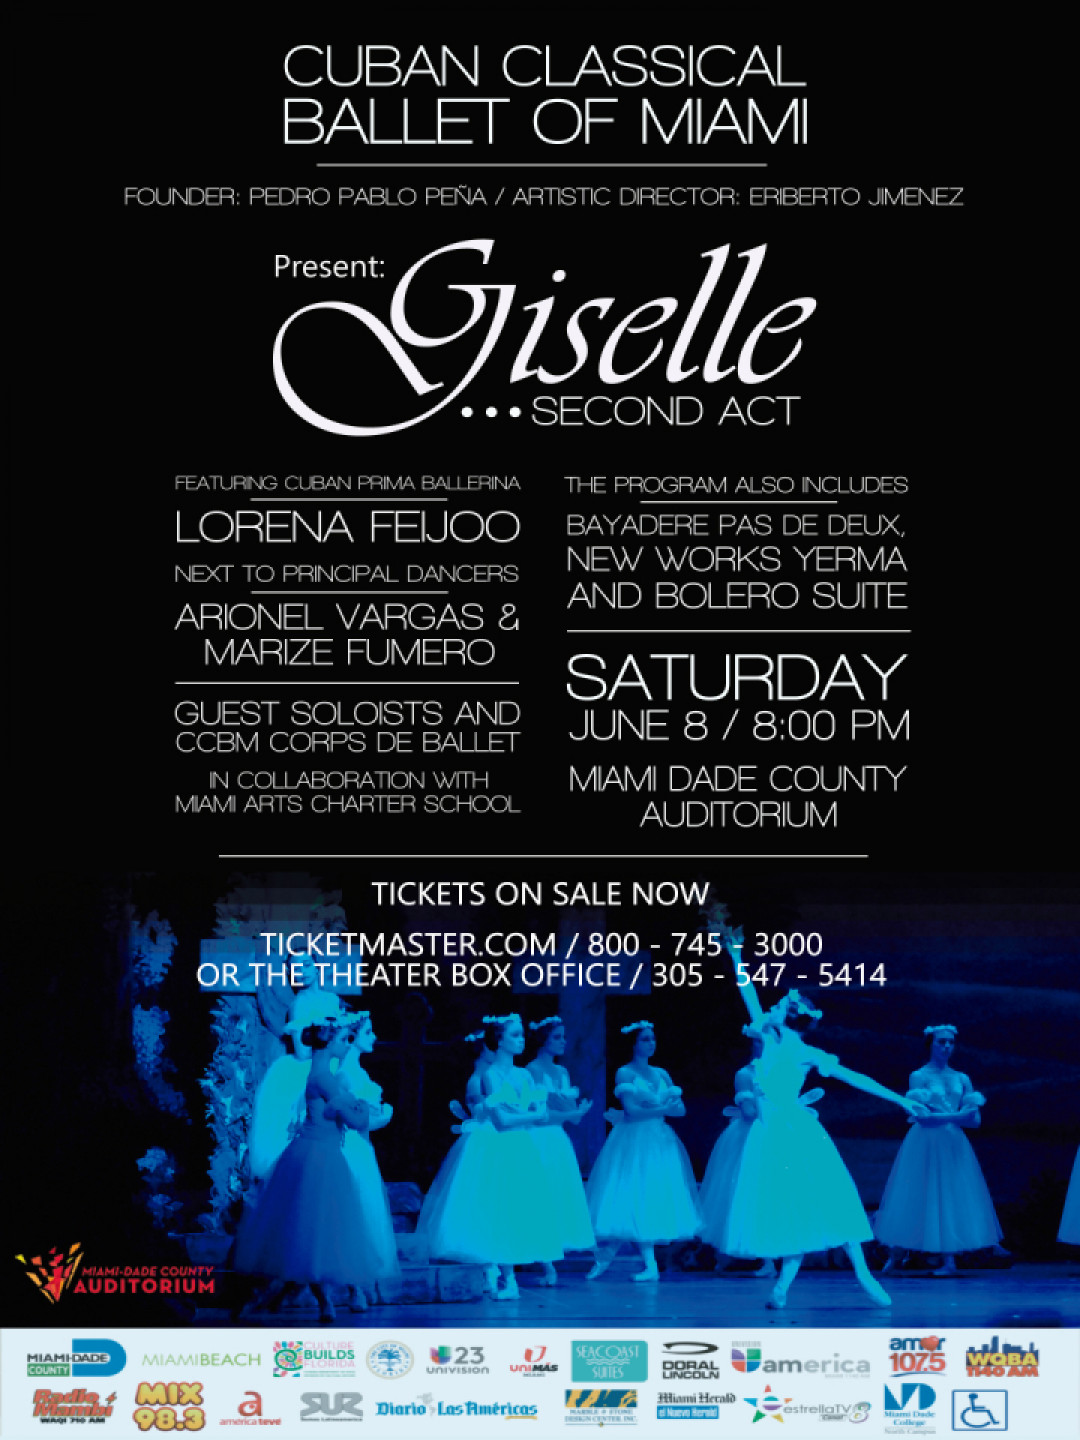 Cuban Classical Ballet of Miami / Giselle II Act